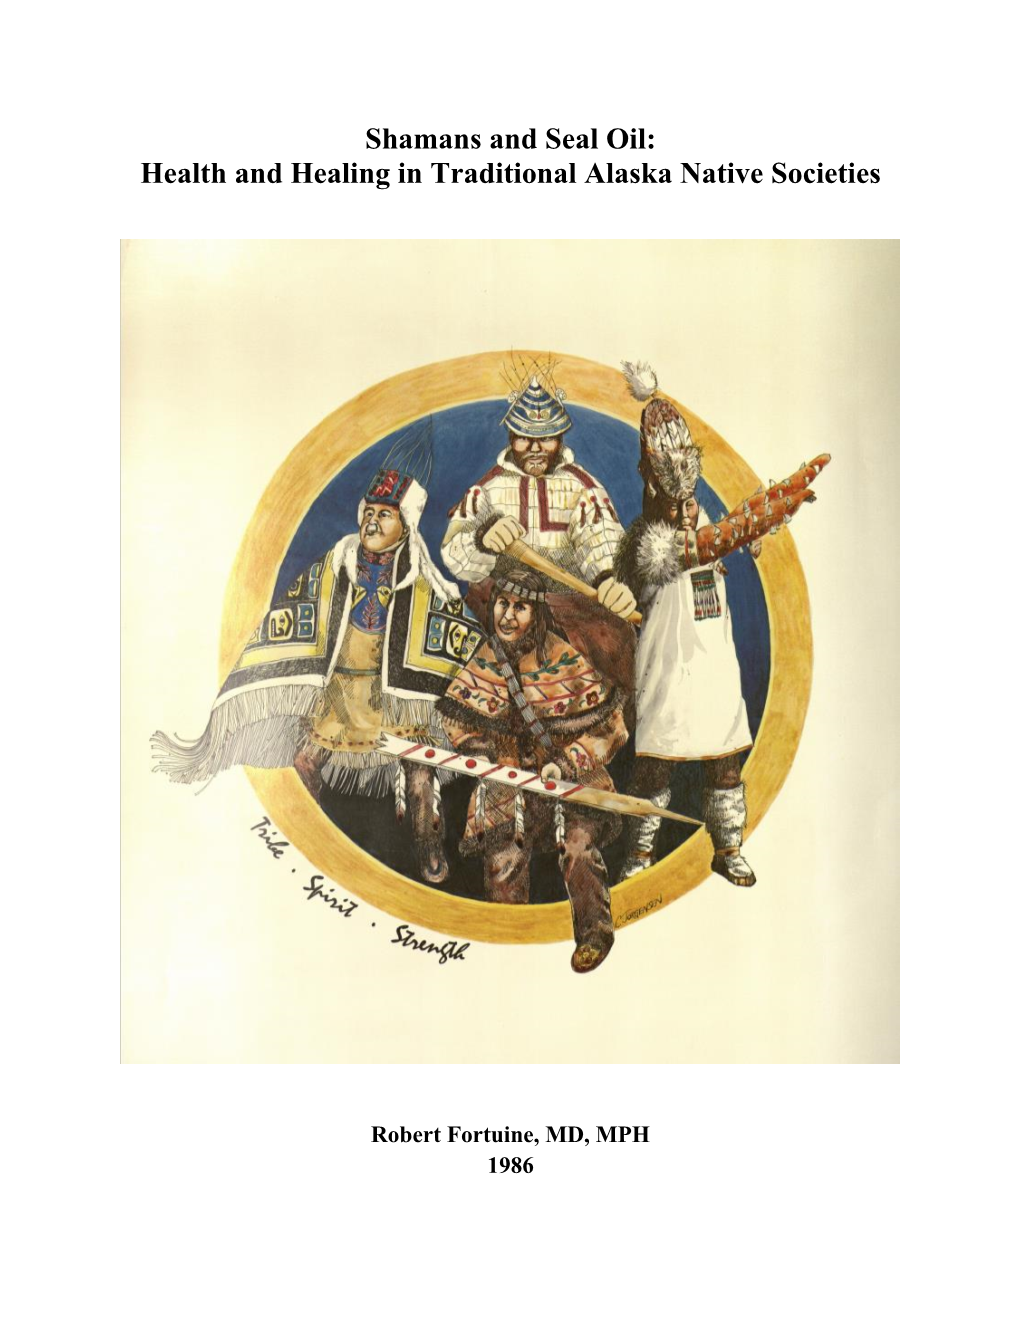 Shamans and Seal Oil: Health and Healing in Traditional Alaska Native Societies